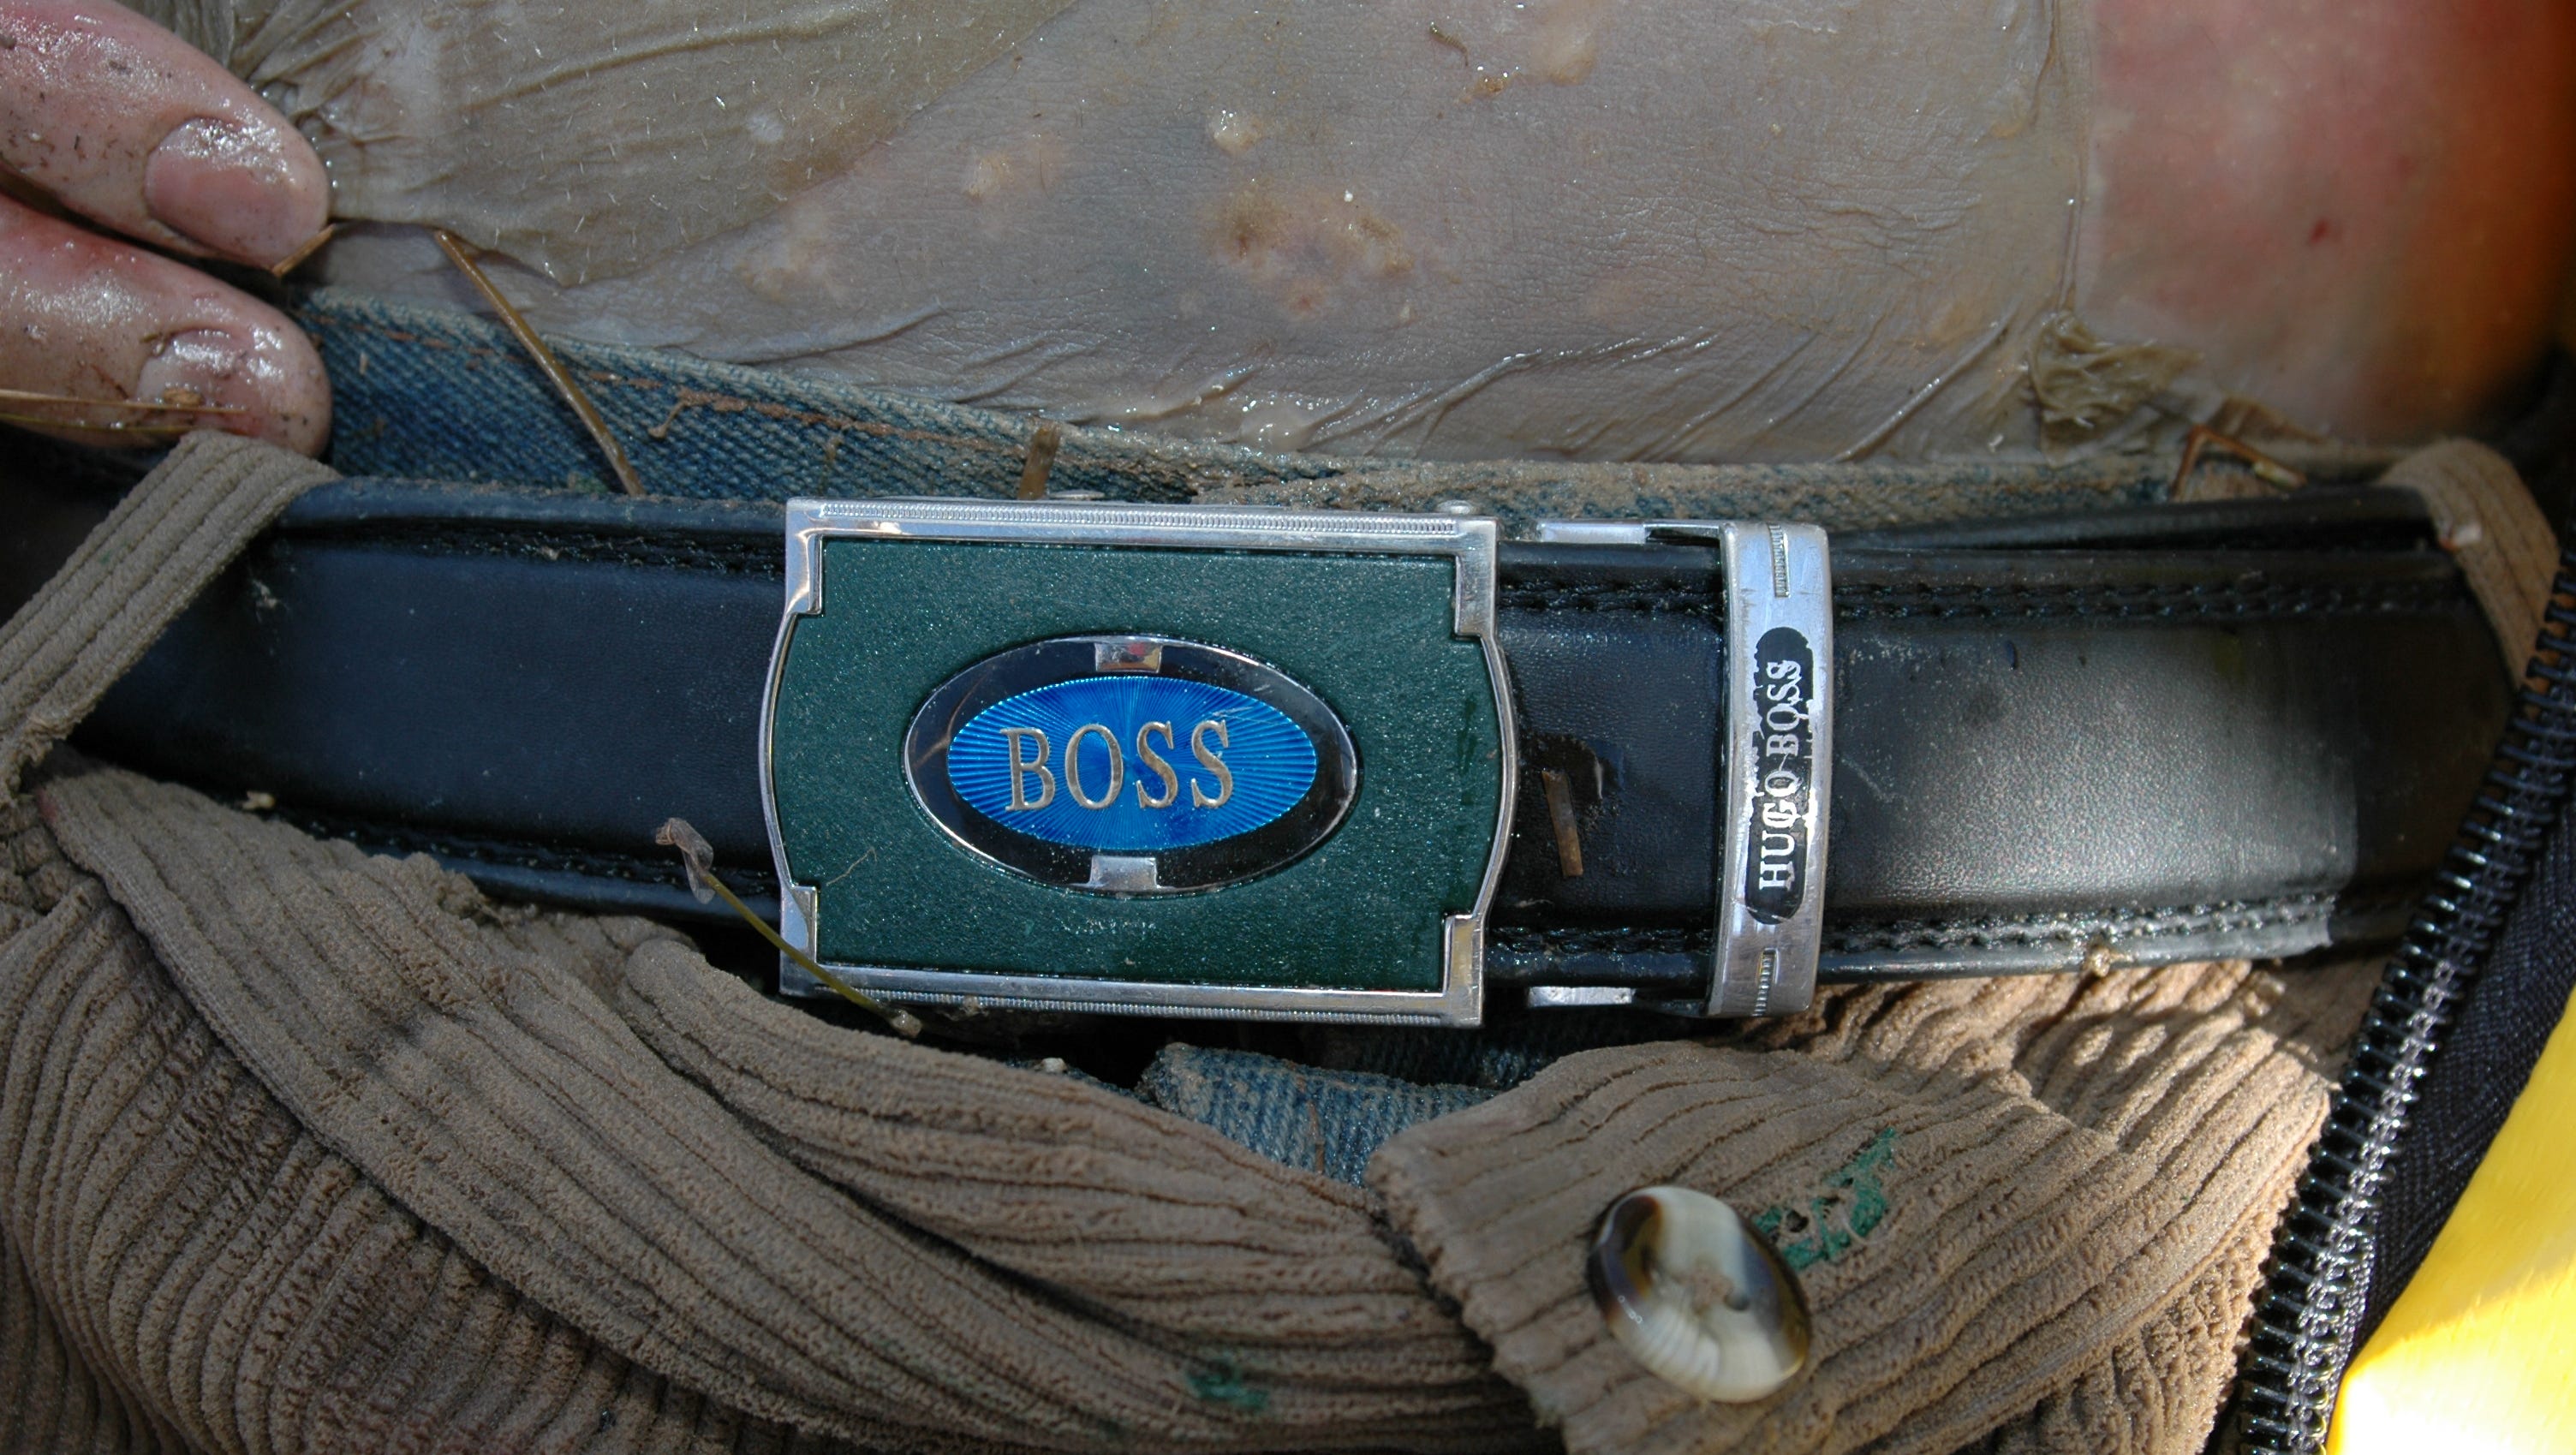 A belt located with the body of a Latino man found in the All-American Canal on June 15, 2005. Photo from John Doe Case #05-101.